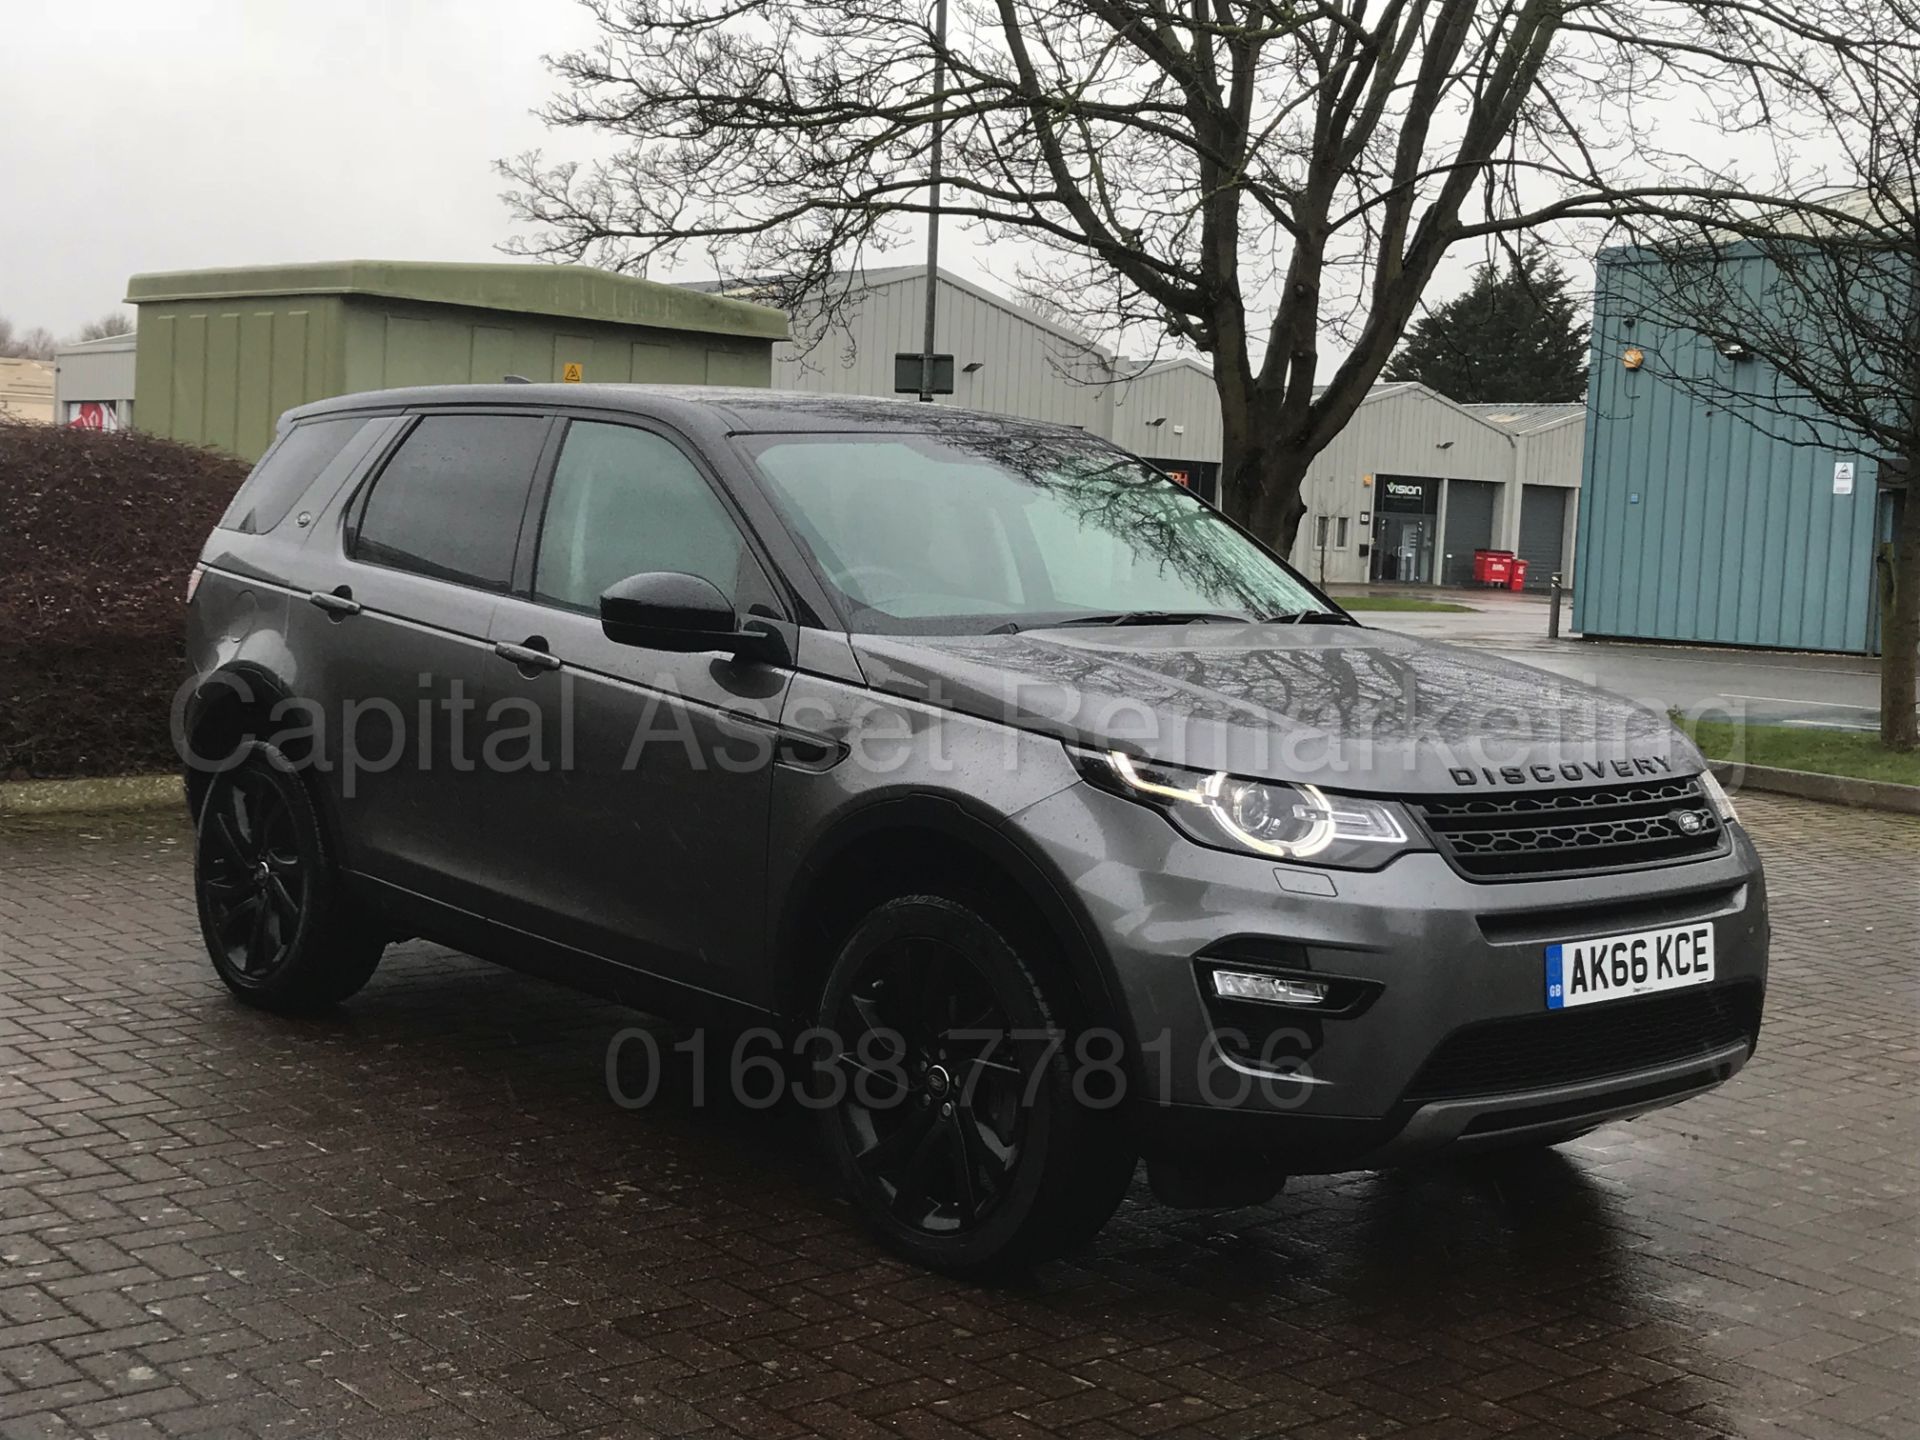 LAND ROVER DISCOVERY SPORT 'HSE - BLACK' (2017 MODEL) '2.0 TD4 - AUTO - 7 SEATER' *MASSIVE SPEC* - Image 12 of 53